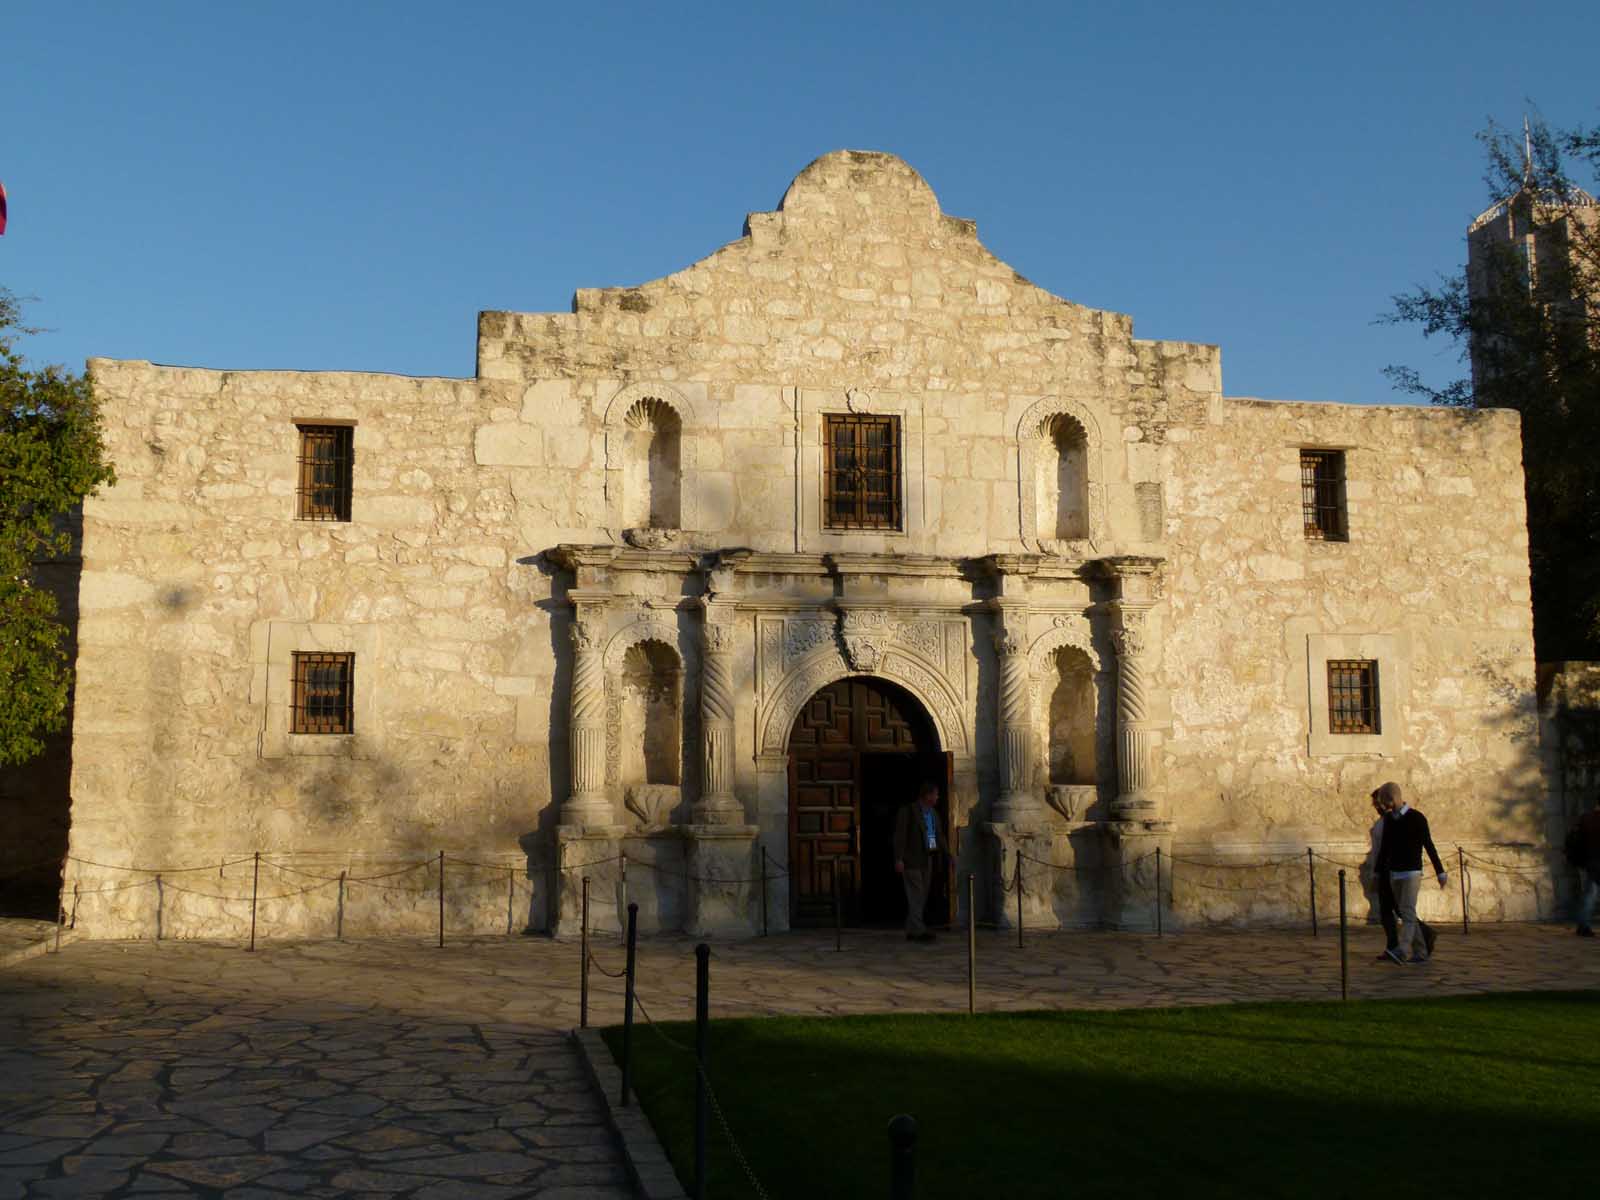 Facts about the Texas Alamo